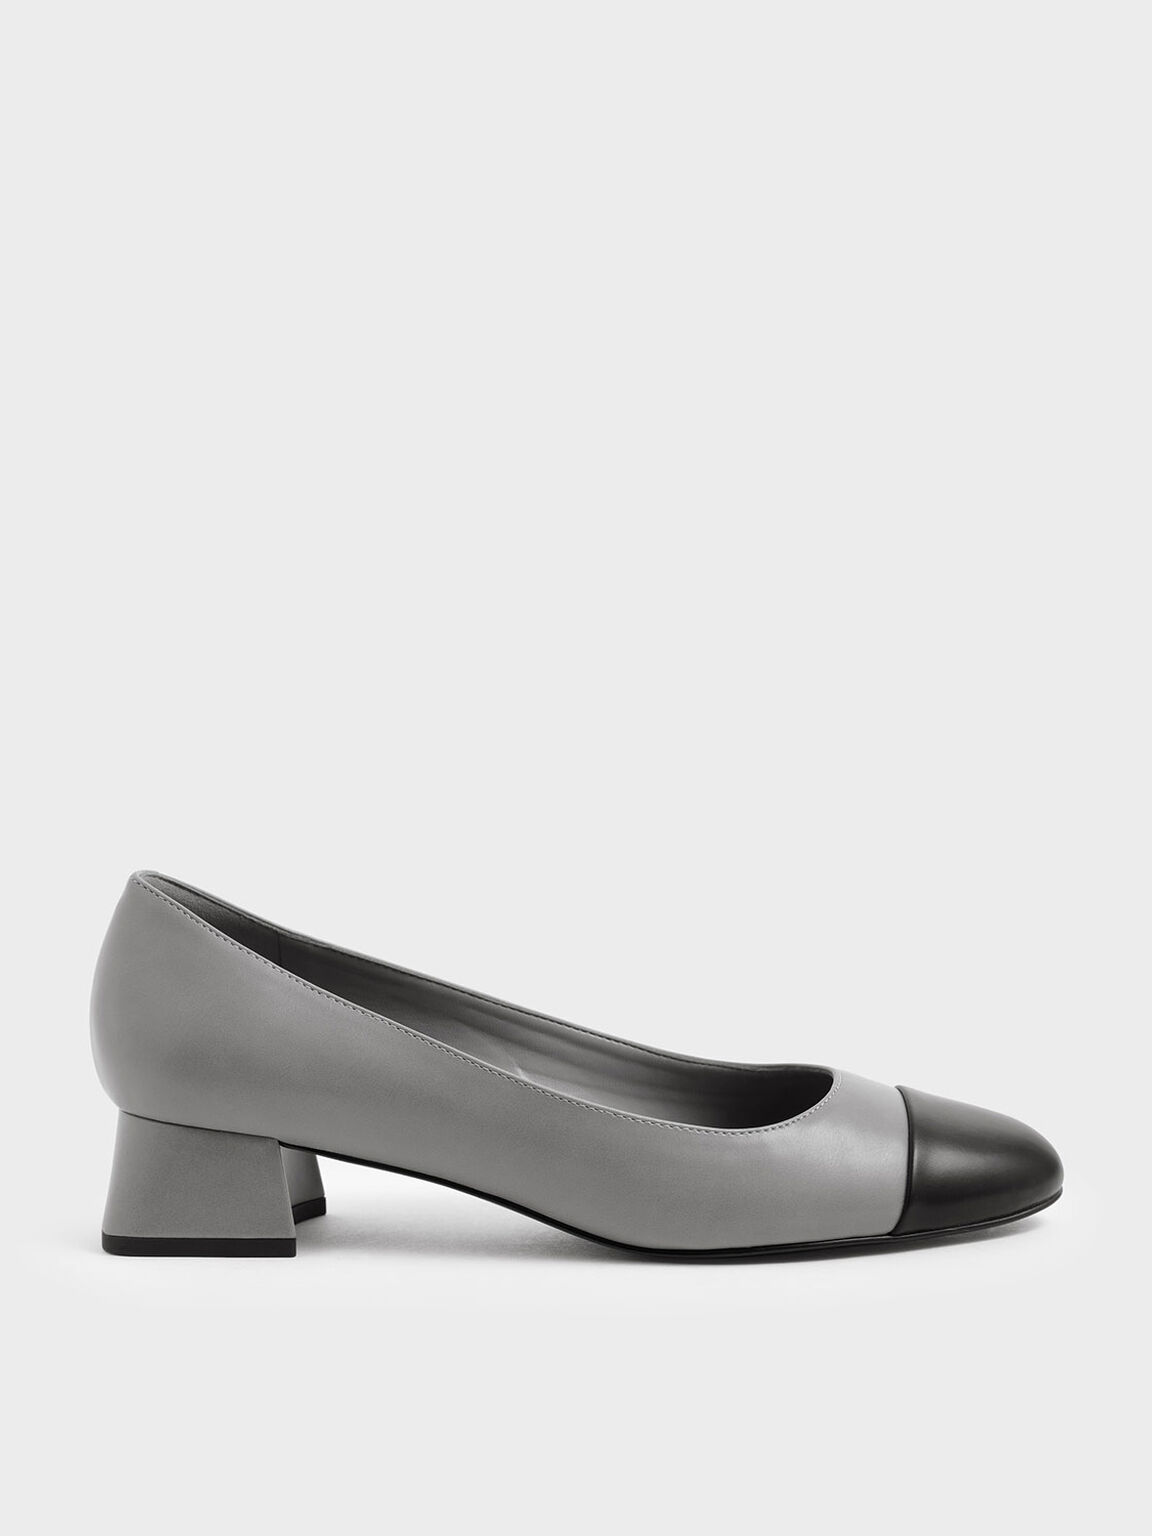 Two-Tone Round Toe Curved Block Heel Pumps